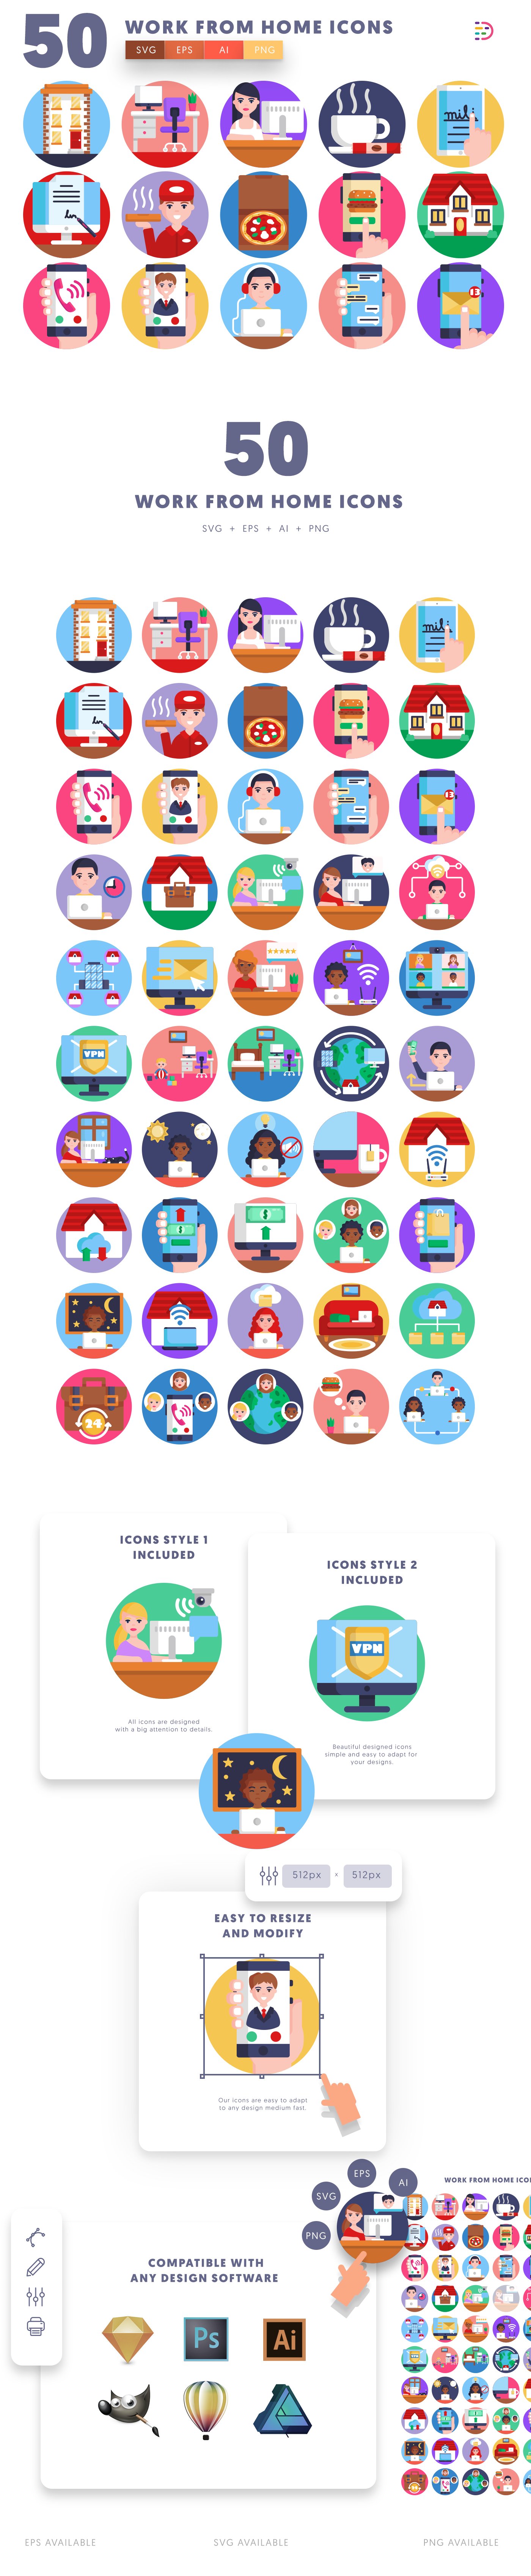 50 Work From Home Icons cover image.